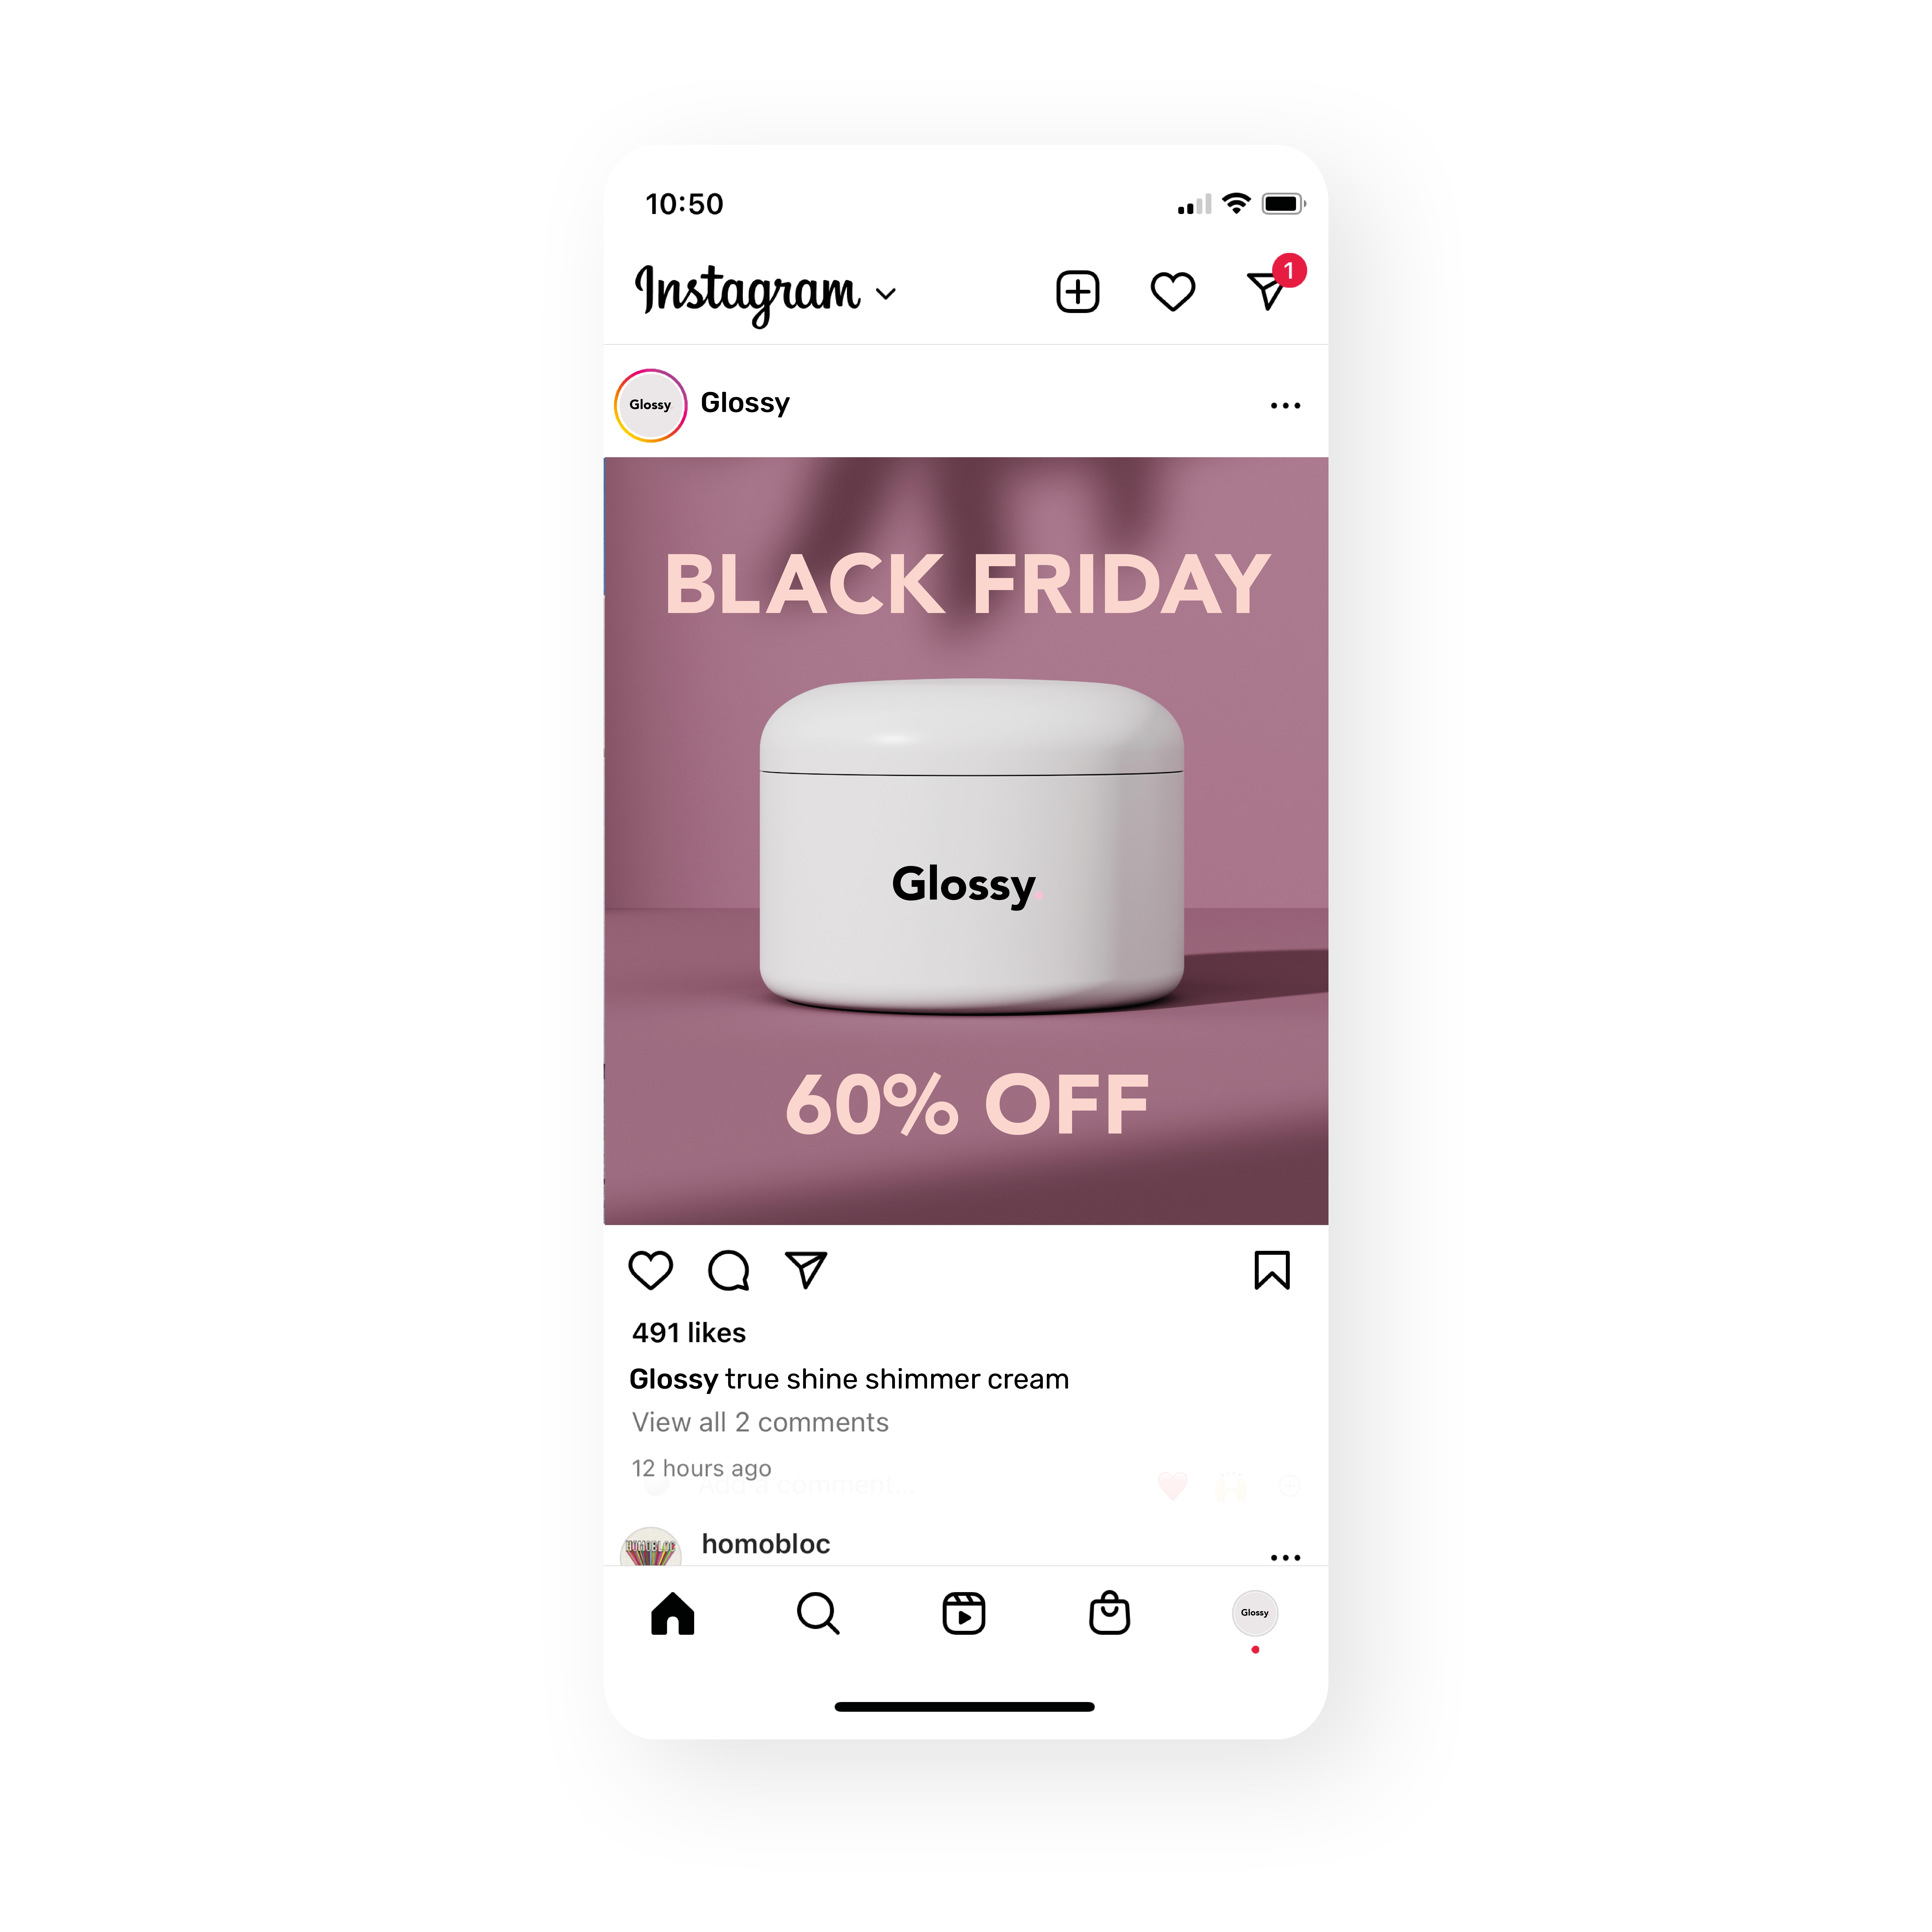 Instagram post showing a Black Friday deal